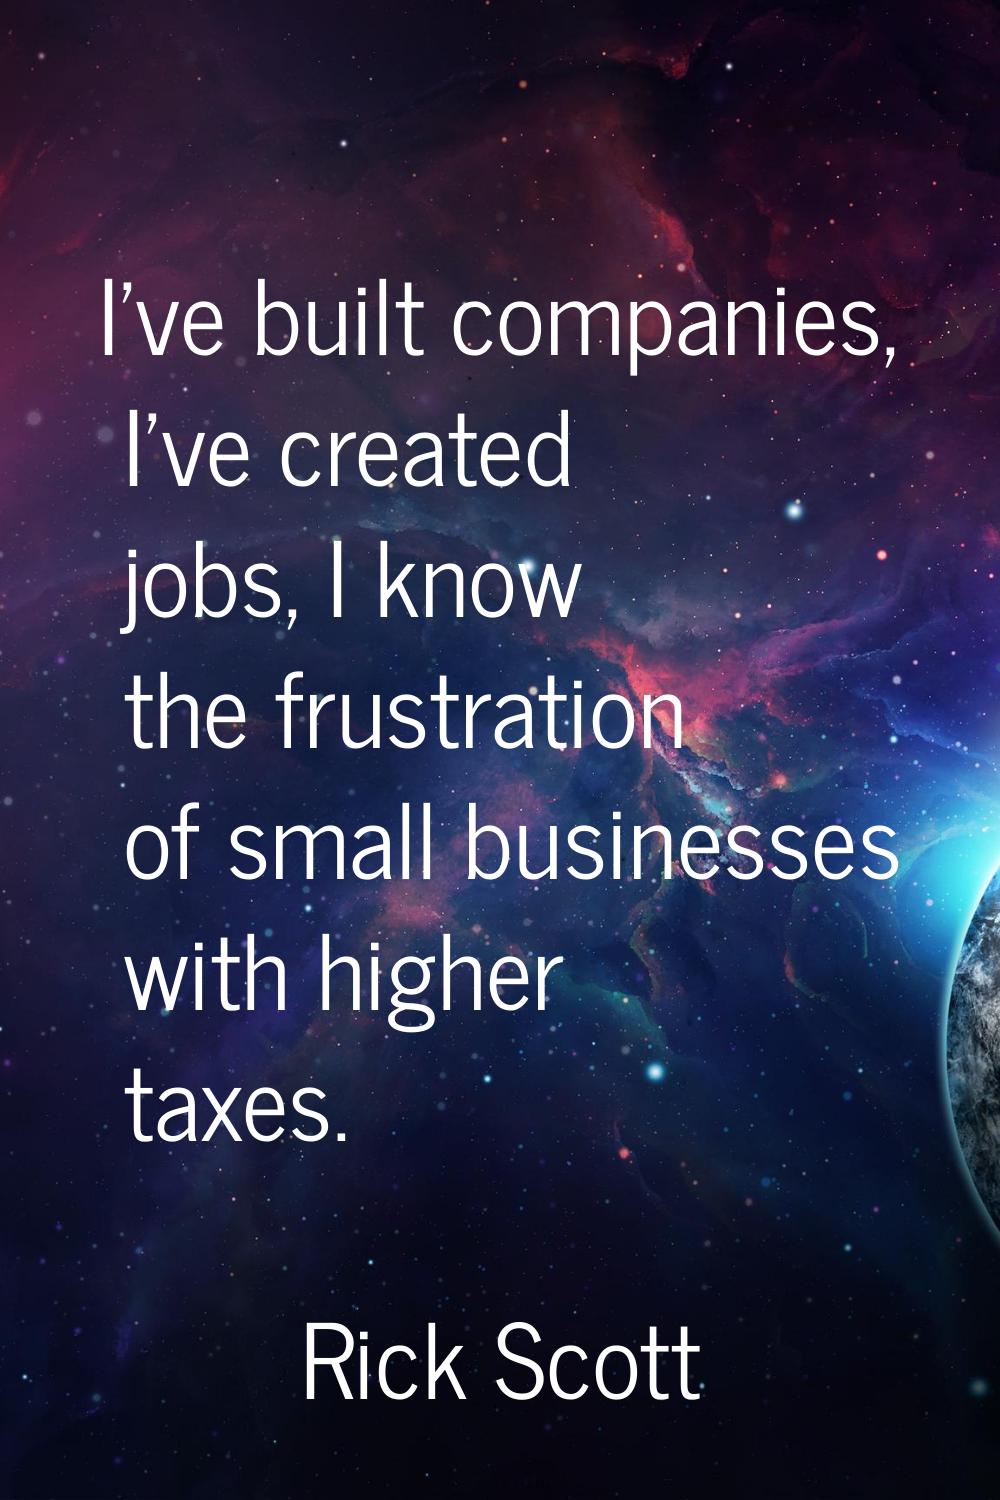 I've built companies, I've created jobs, I know the frustration of small businesses with higher tax